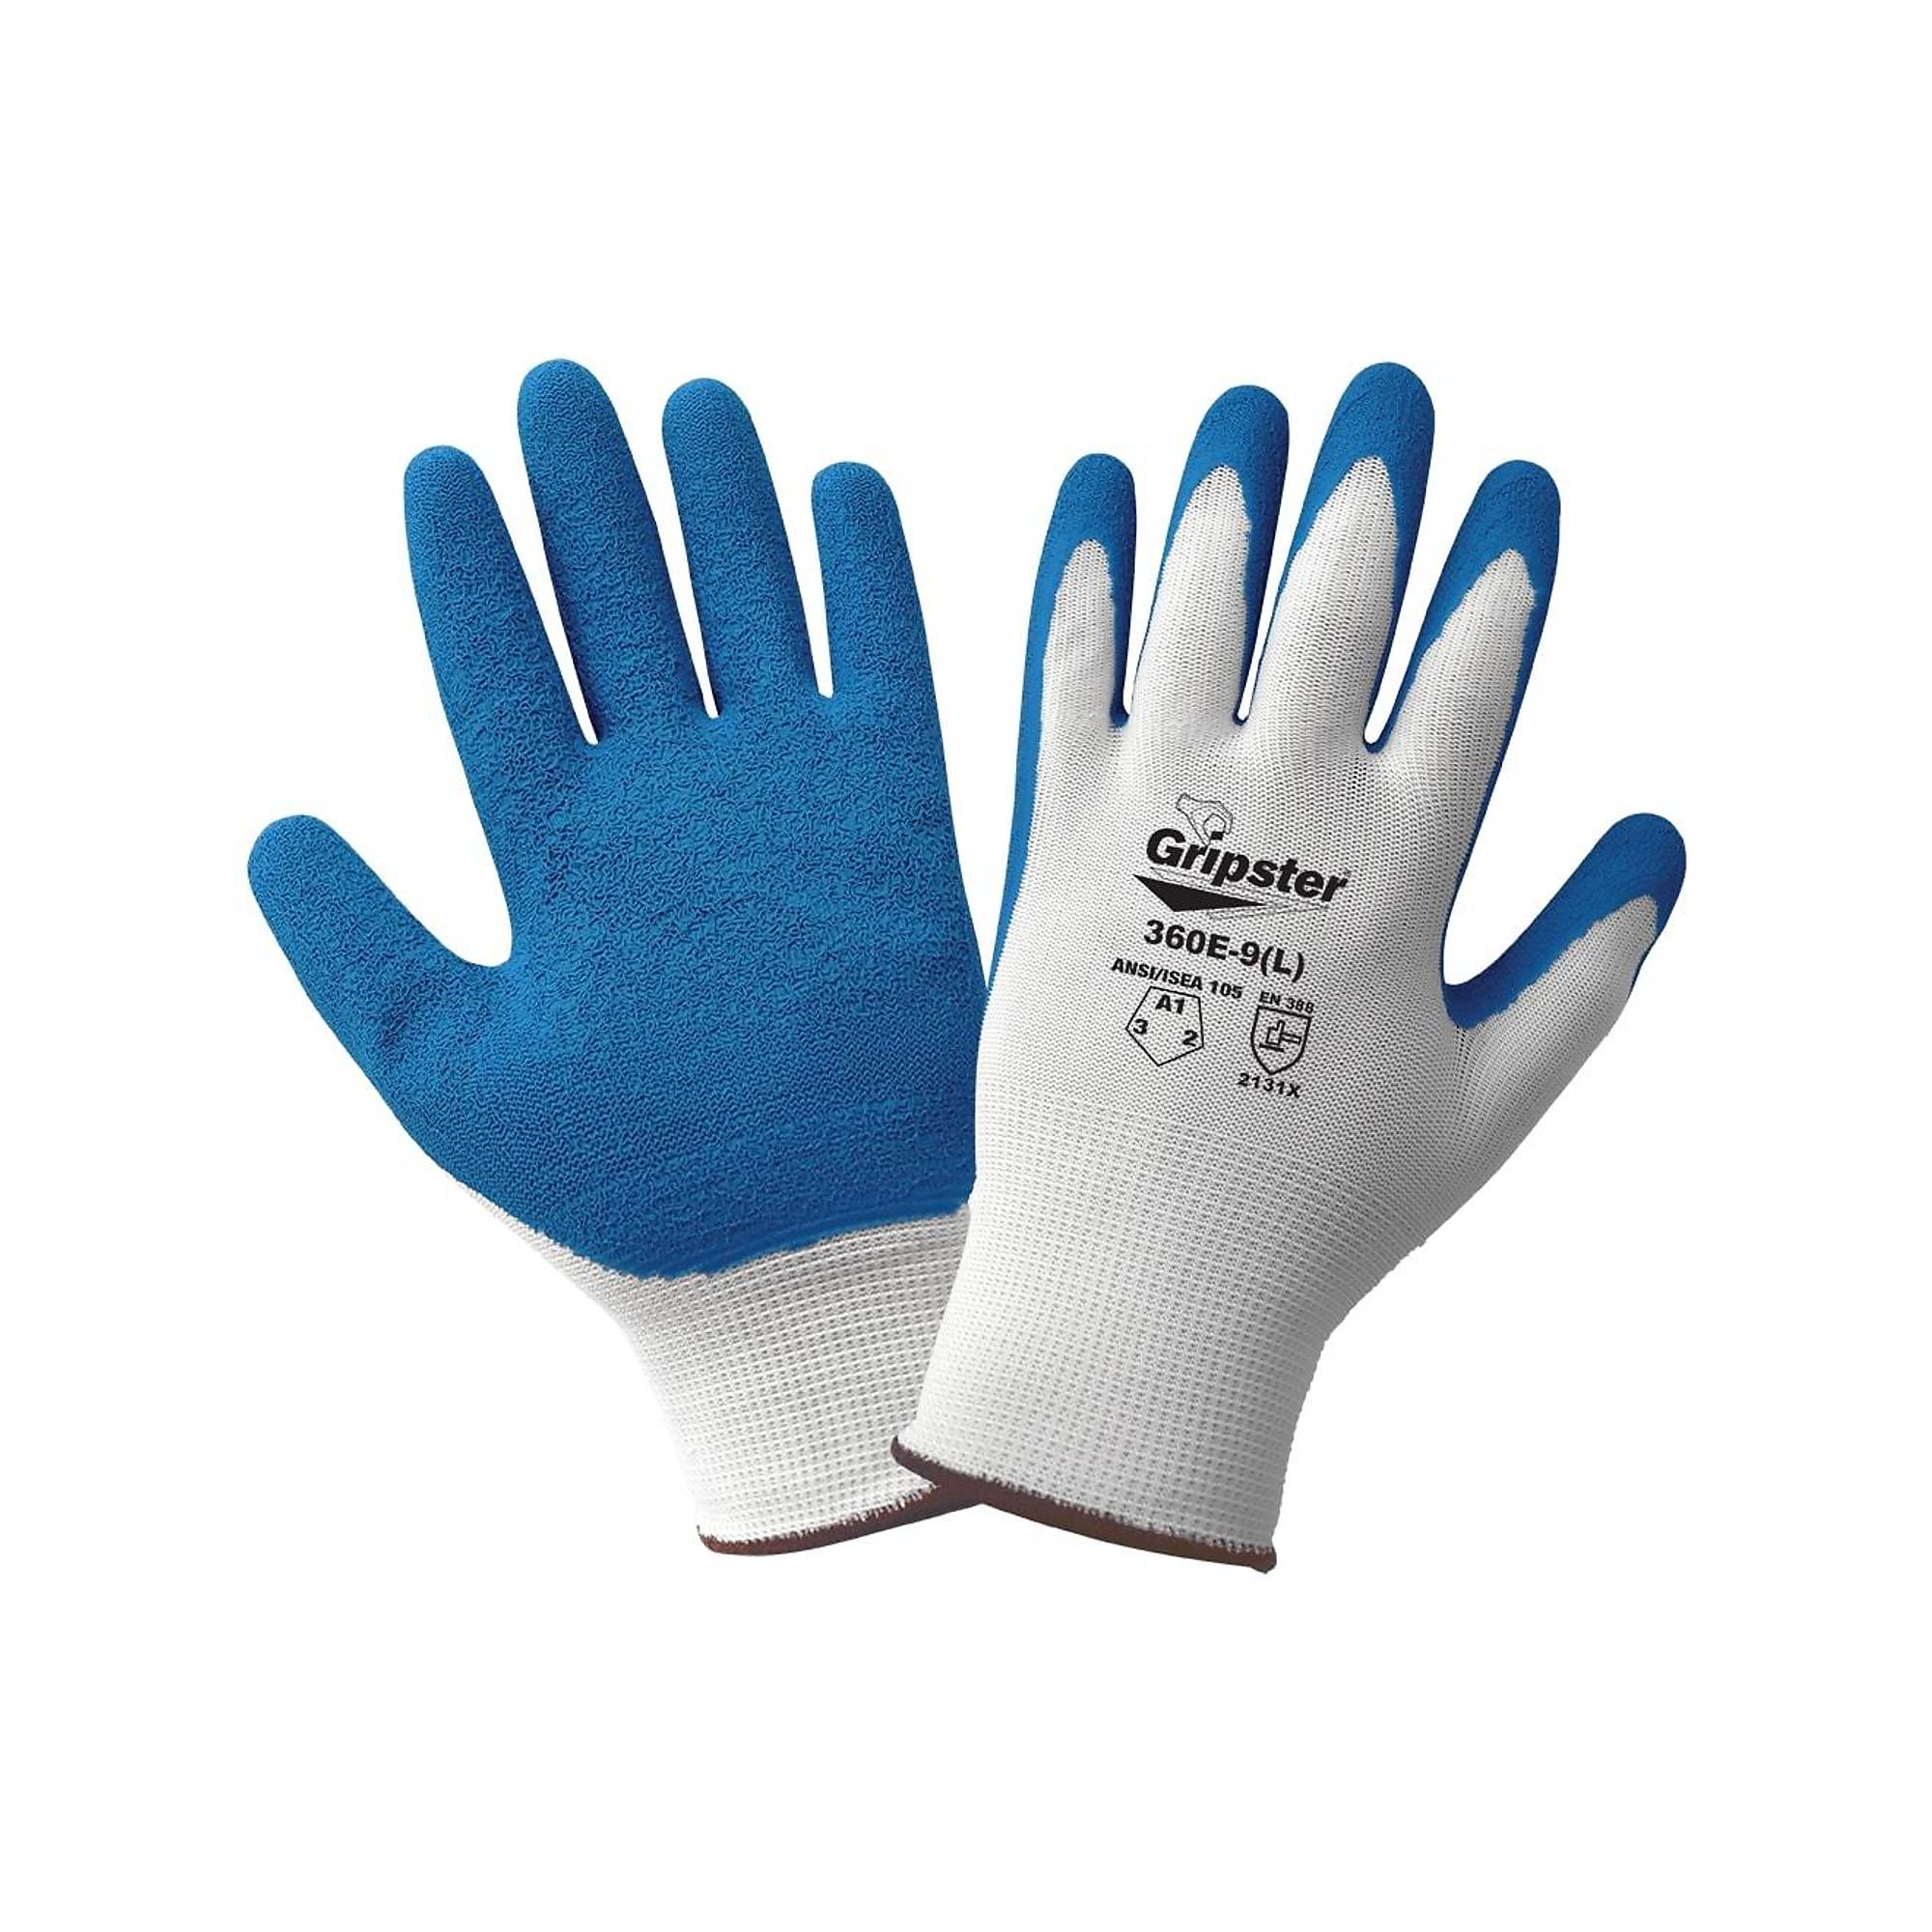 Global Glove Gripster , White, Blue Rub Coated, Cut Resistant A1 Gloves - 12 Pairs, Size L, Color White/Blue, Included (qty.) 12 Model 360E-9(L)